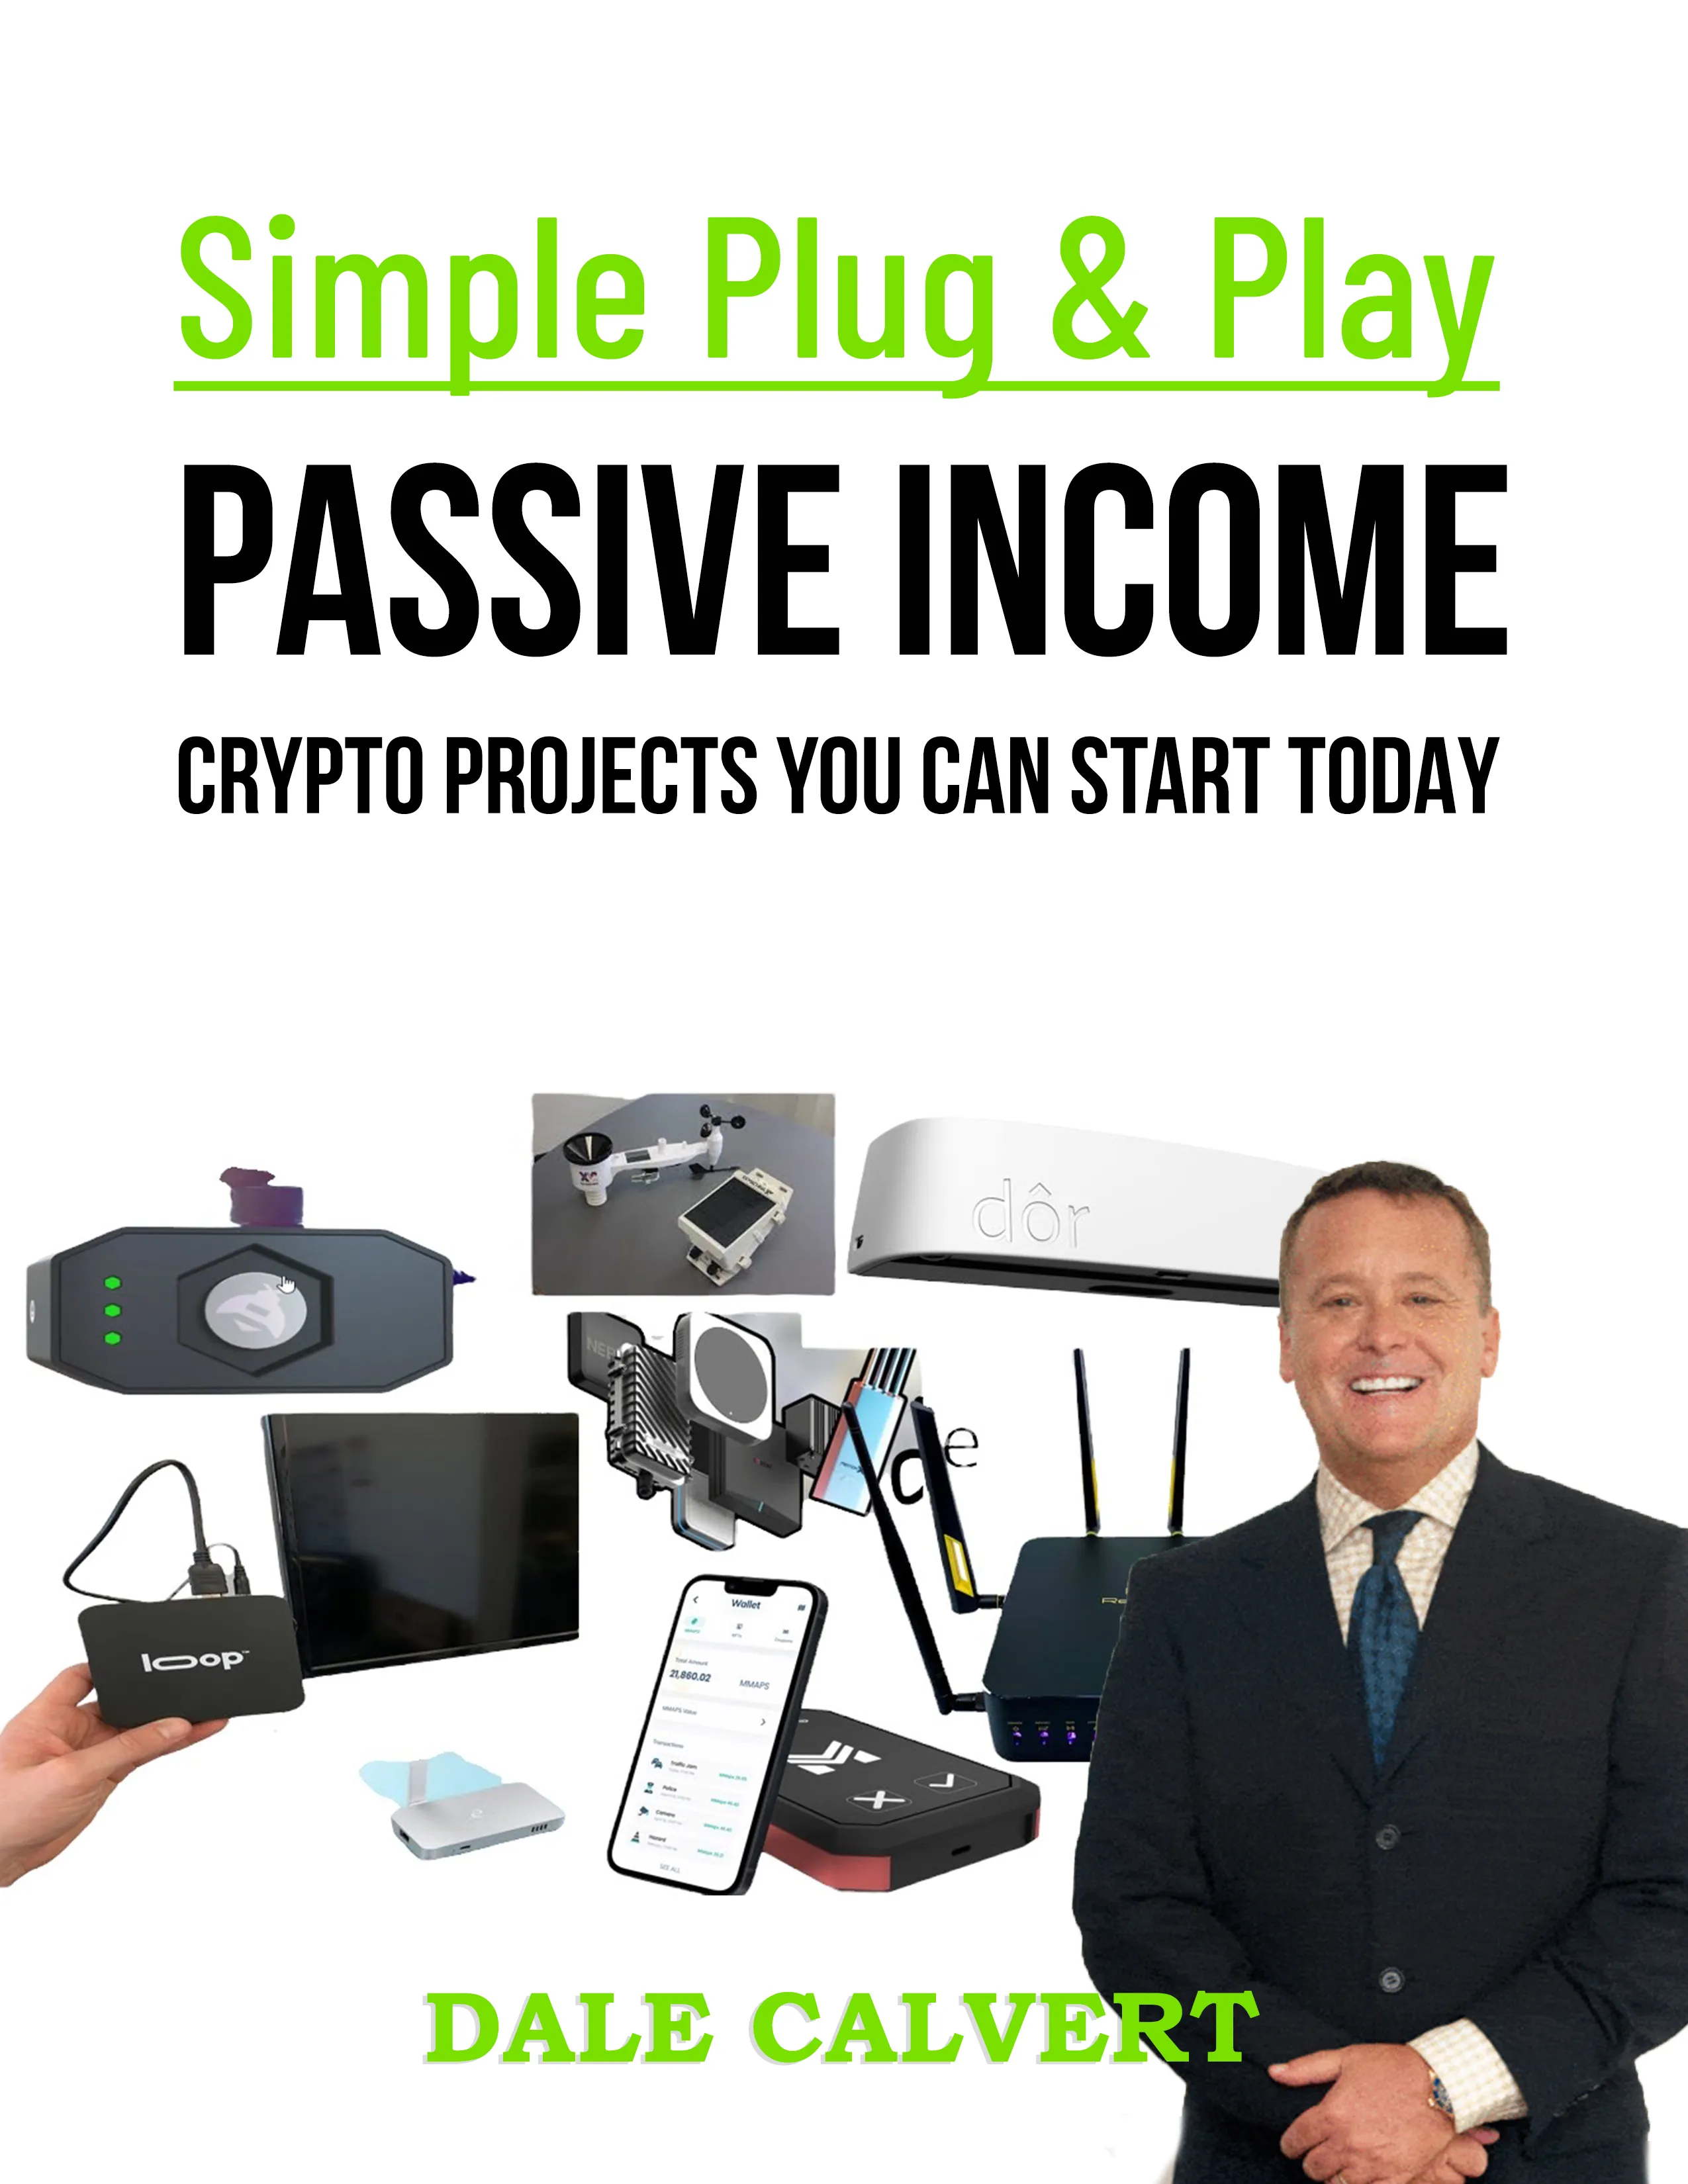 Simple Plug & Play Passive Income Crypto Projects You Can Start Today by Dale Calvert